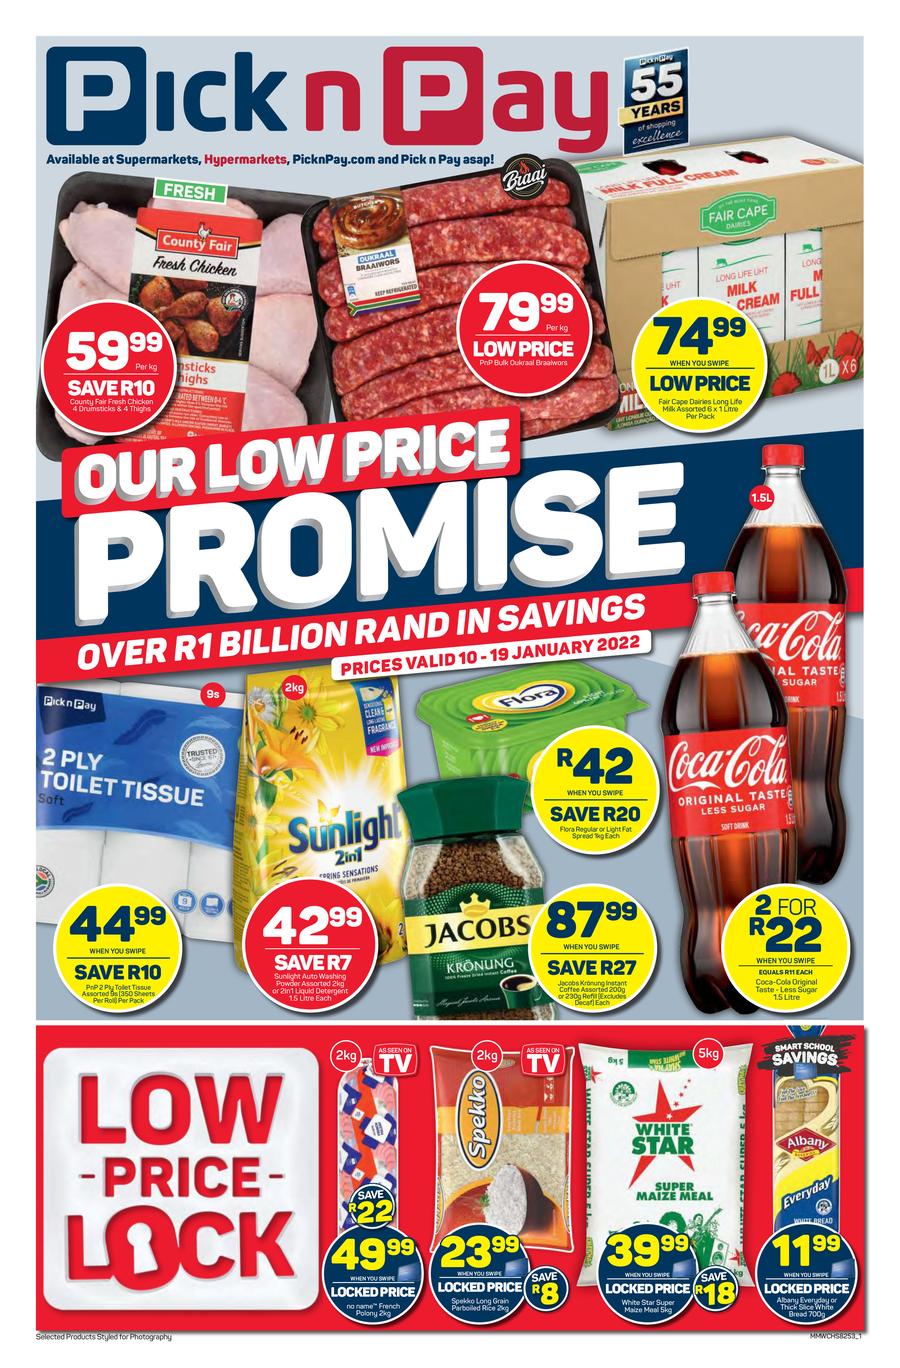 Pick n Pay Western Cape : Weekly Specials (10 January - 19 January